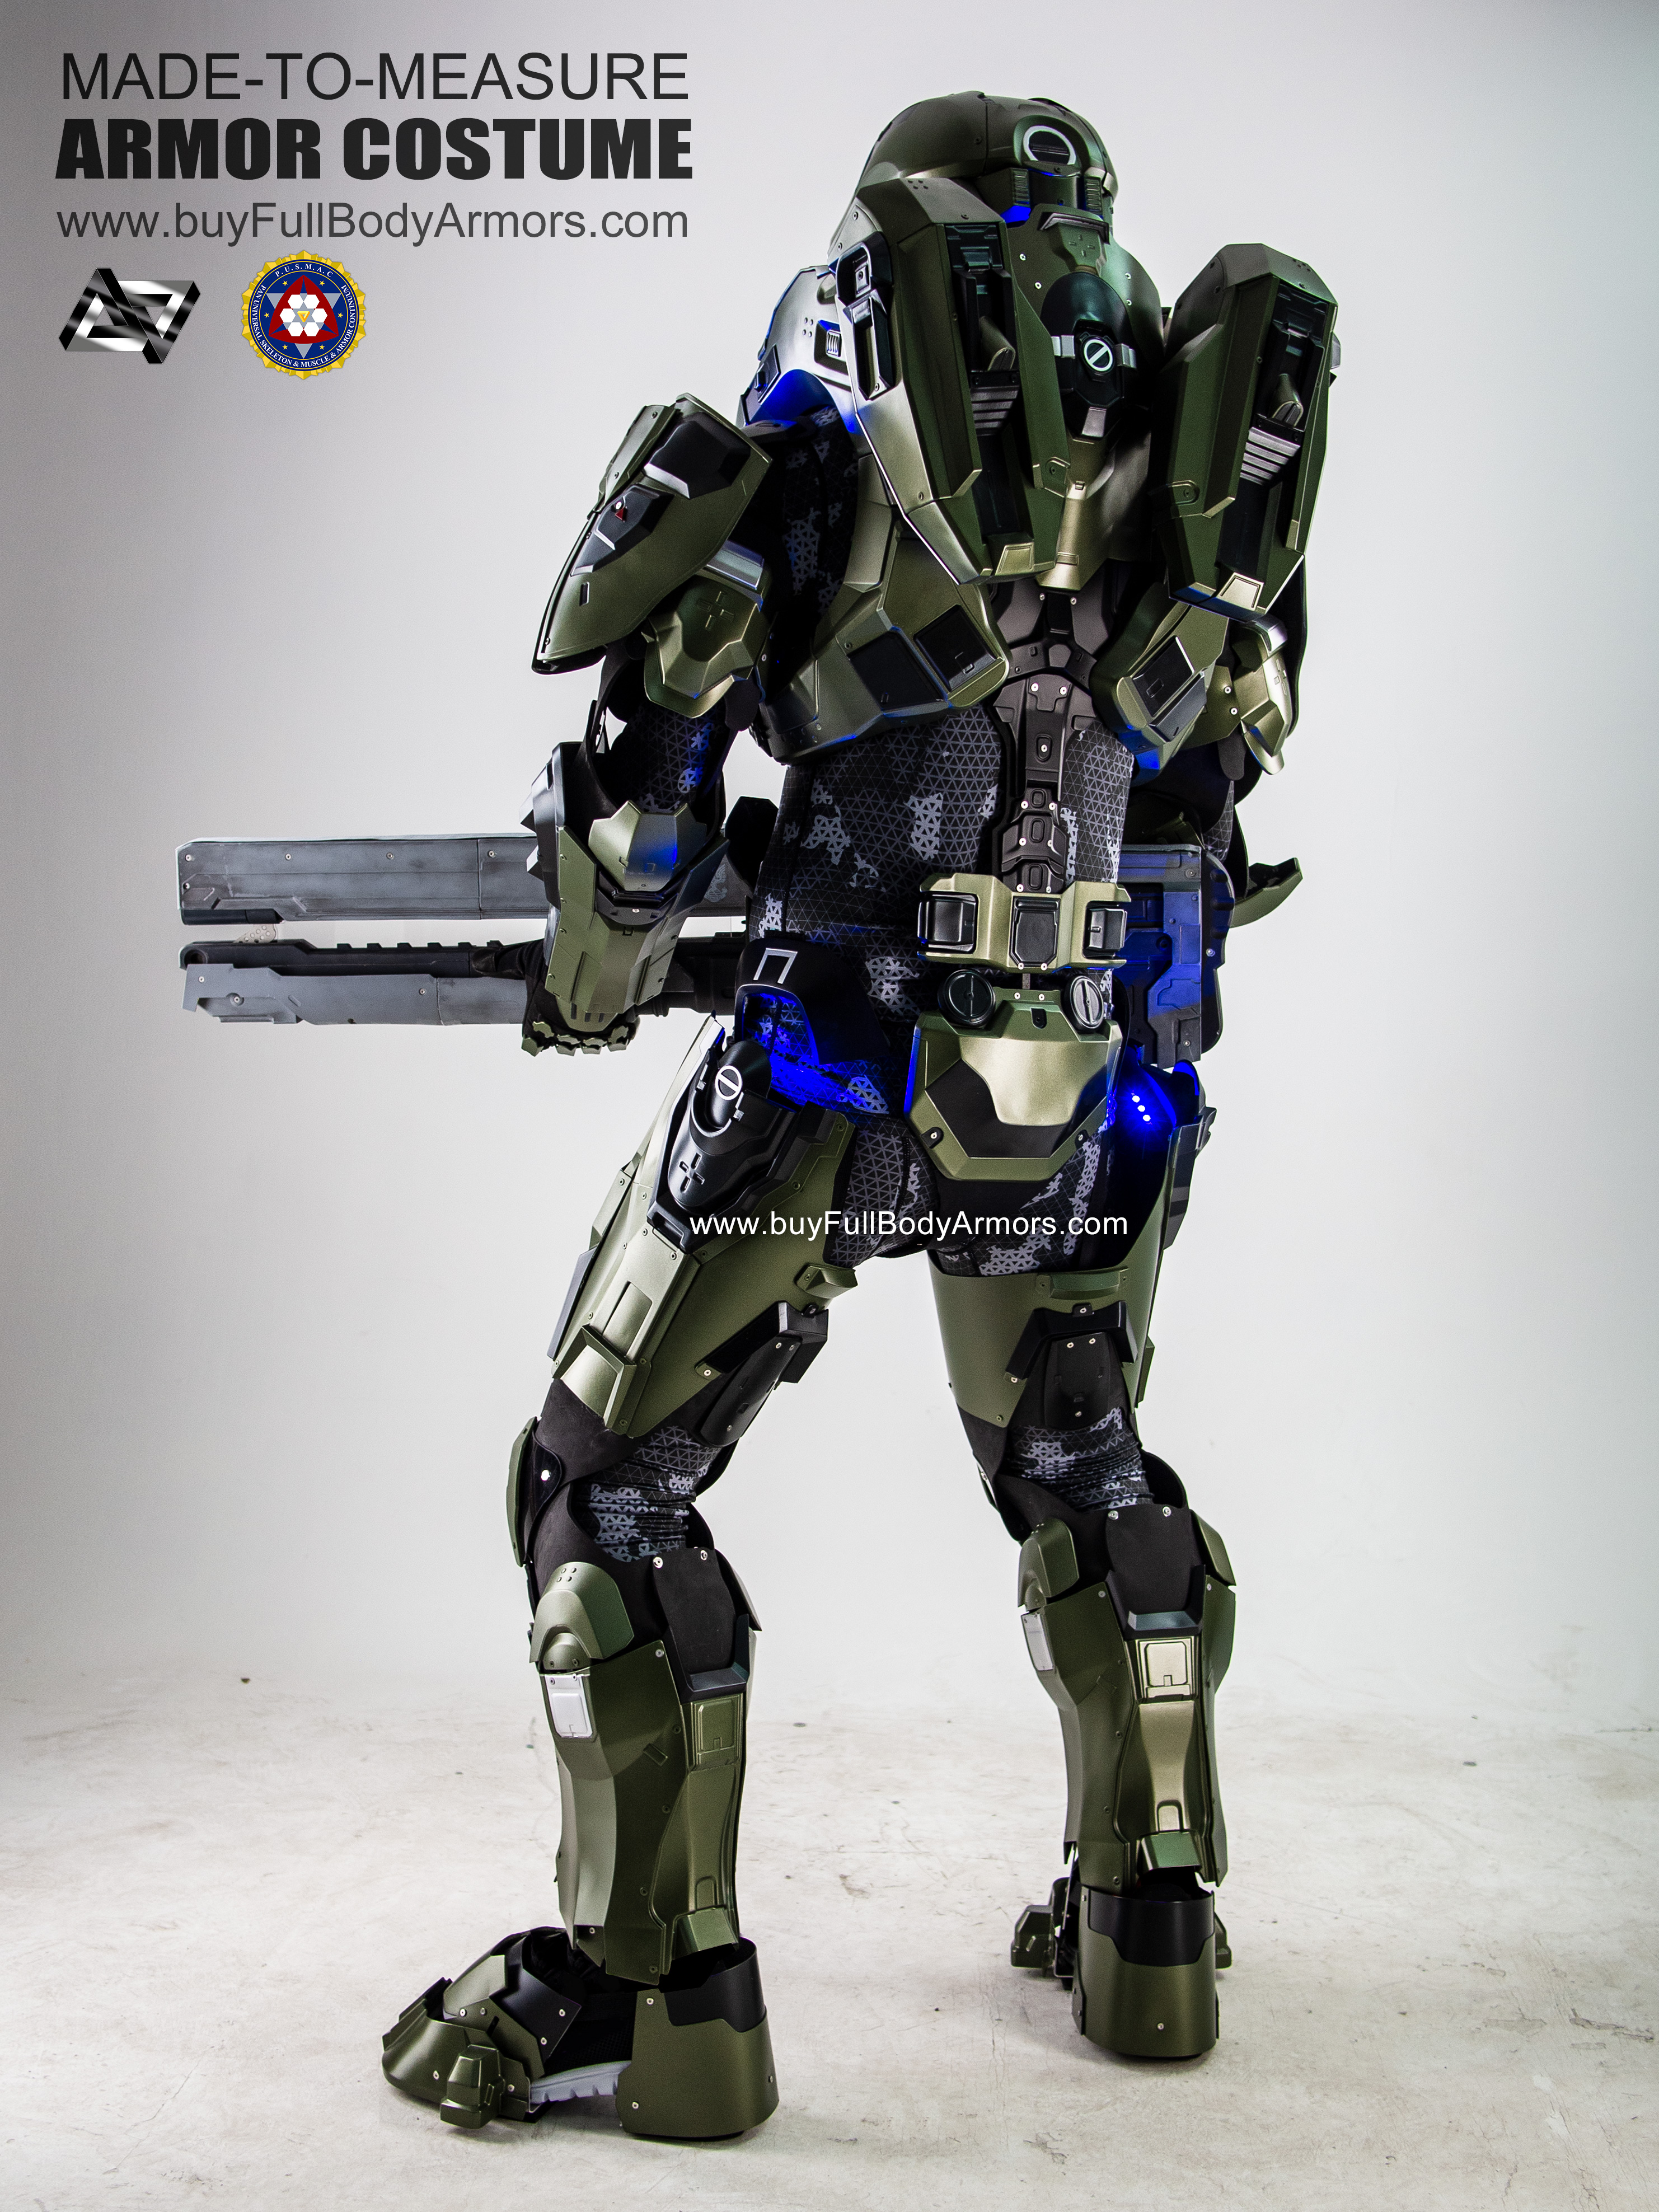 Halo 5 Master Chief Armor Suit Costume back